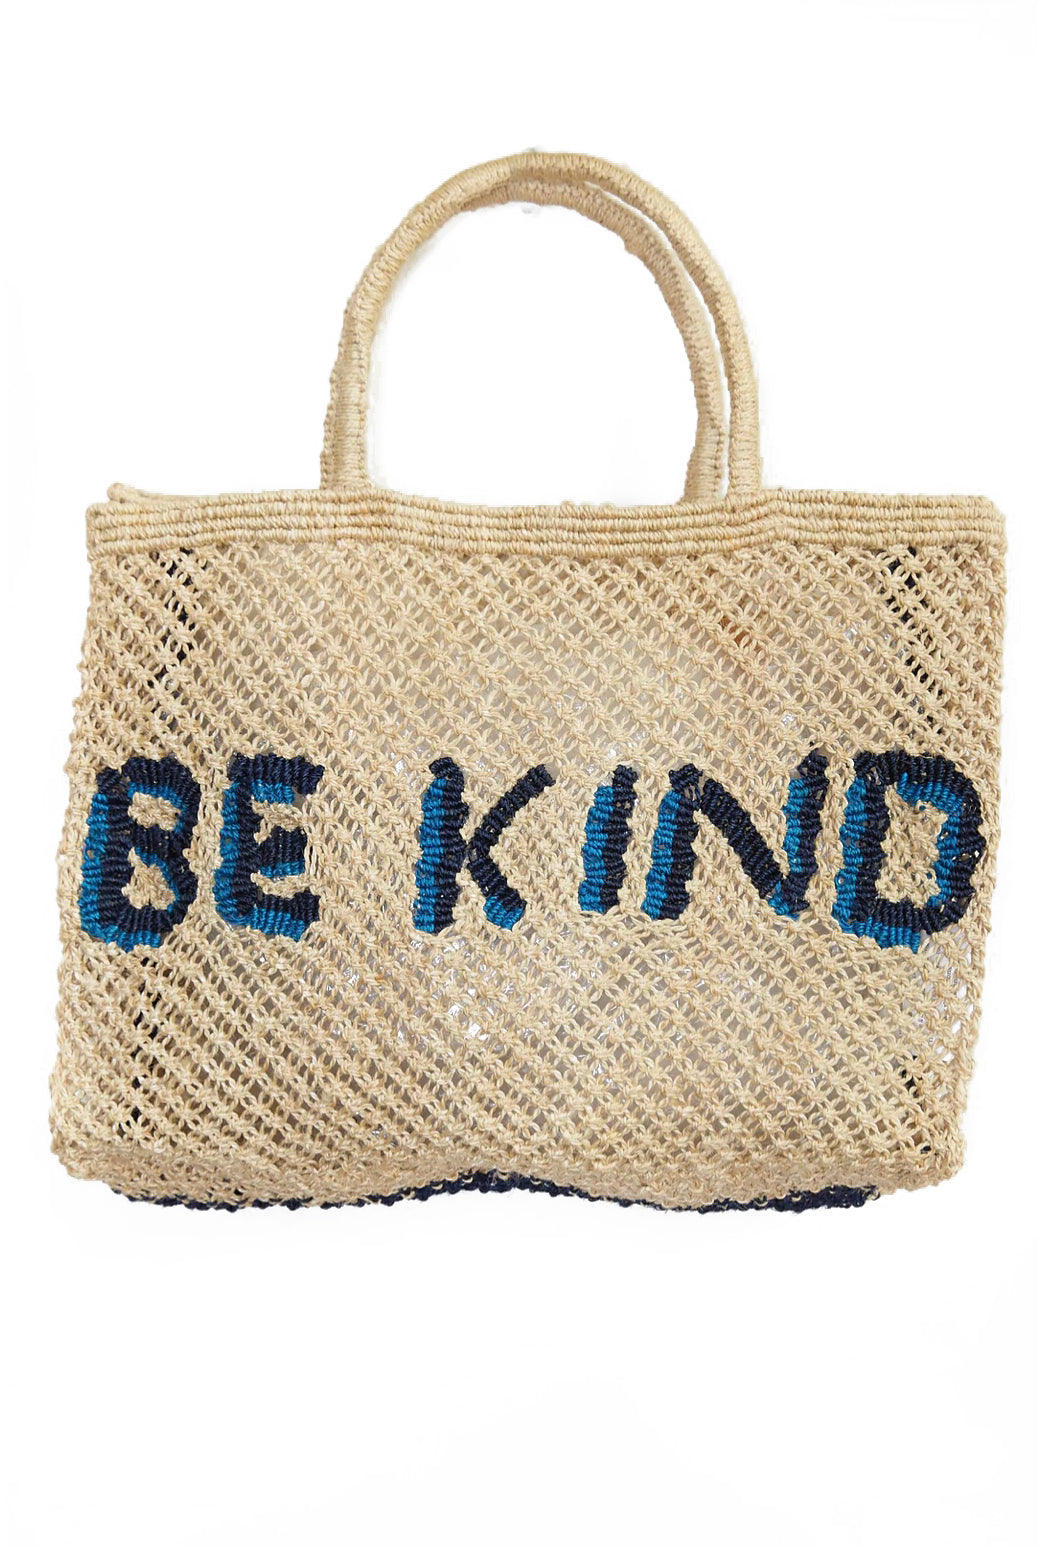 Be Kind- Natural and blue